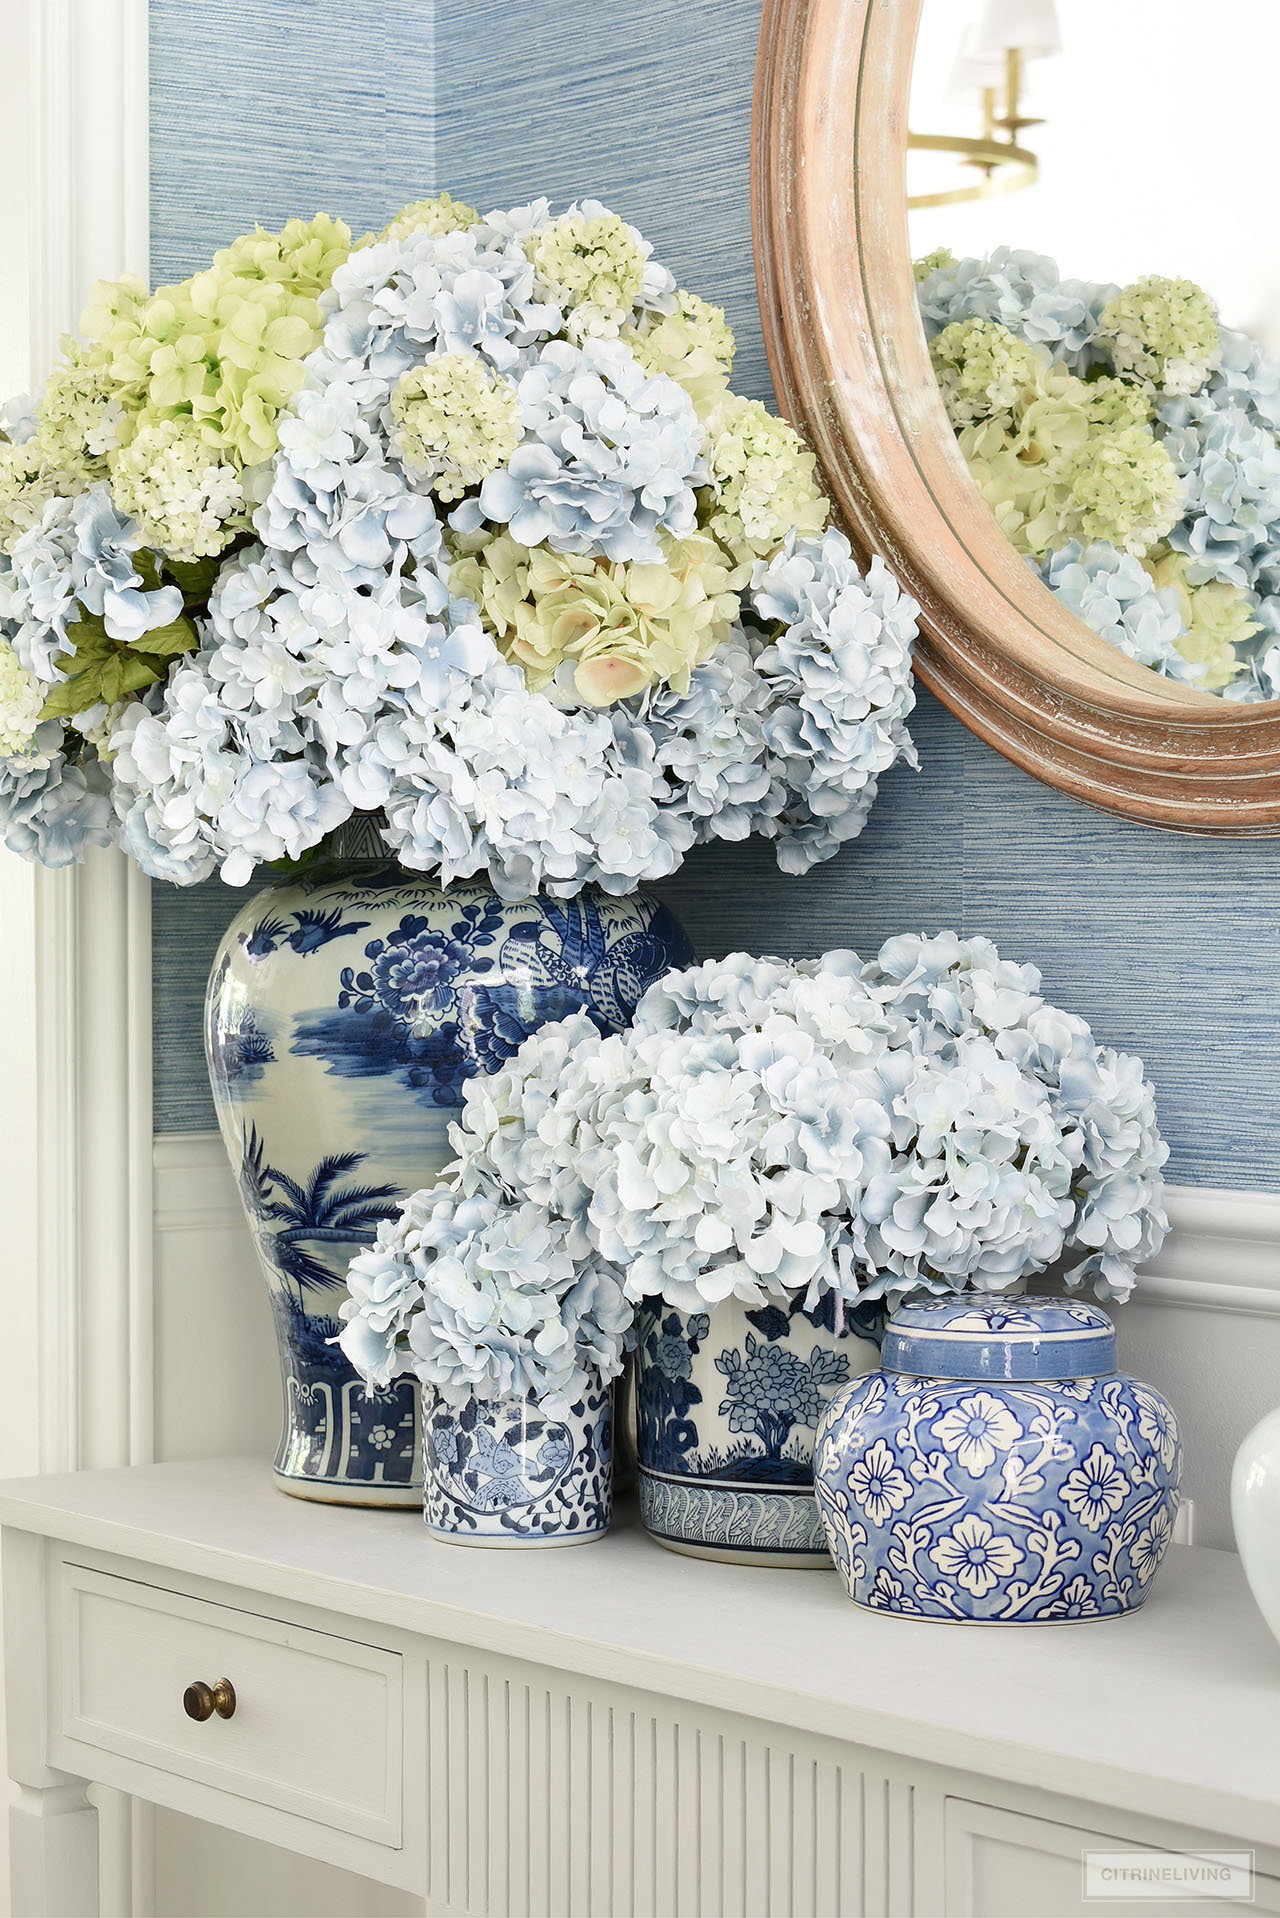 A stunning display of light blue and green hydrangeas arranged in blue and white ginger jars and vases creates a classic and chic summer look.